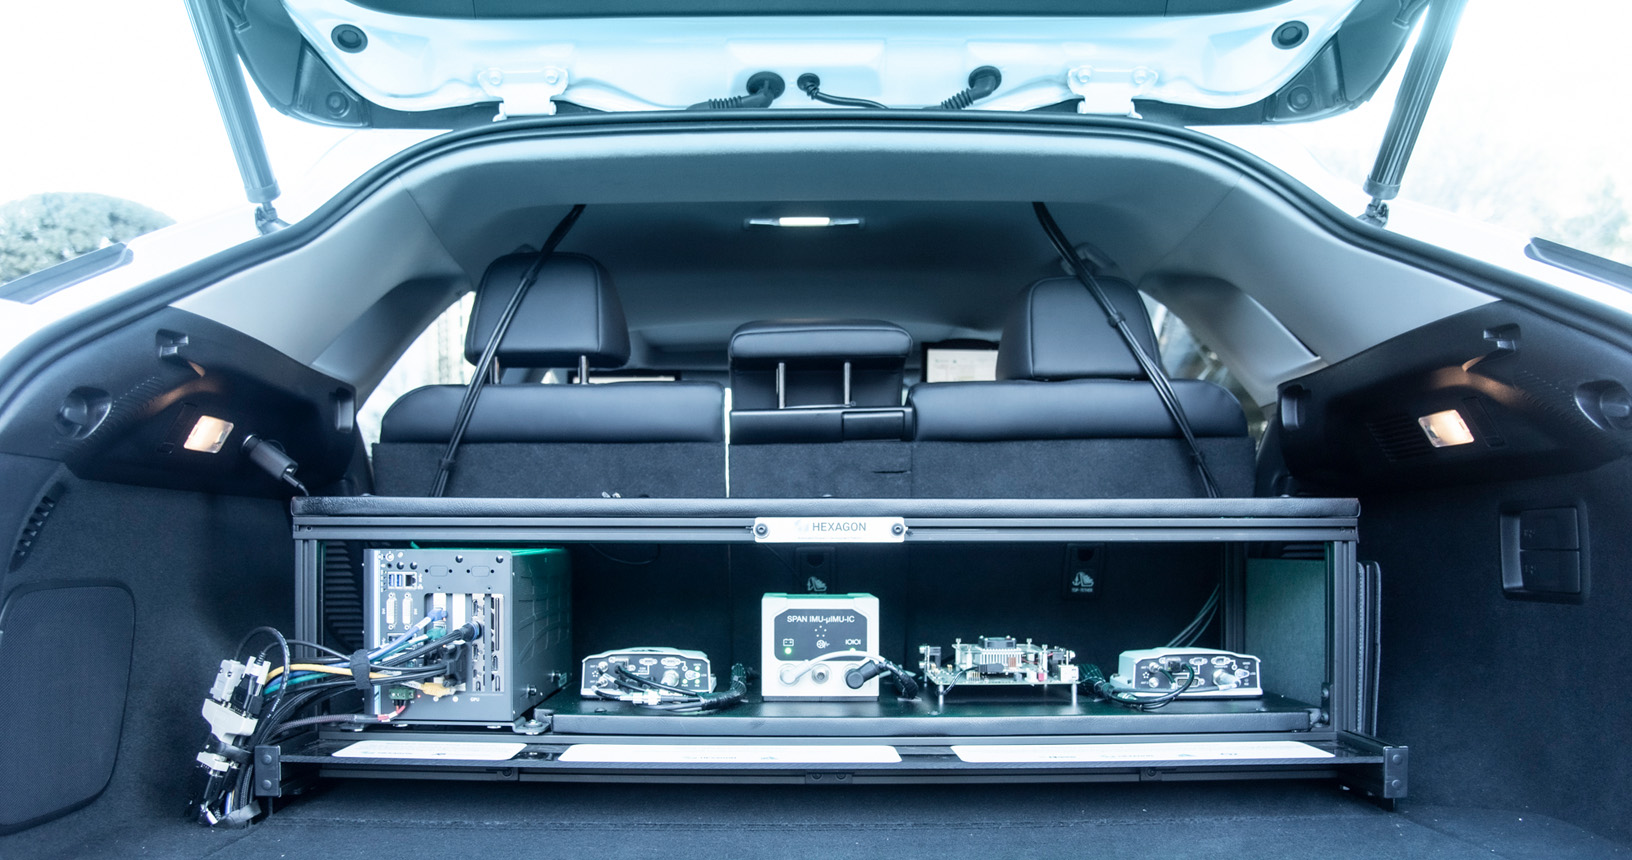 Open trunk of a Lexus car displaying various hardware to enable autonomous operation.